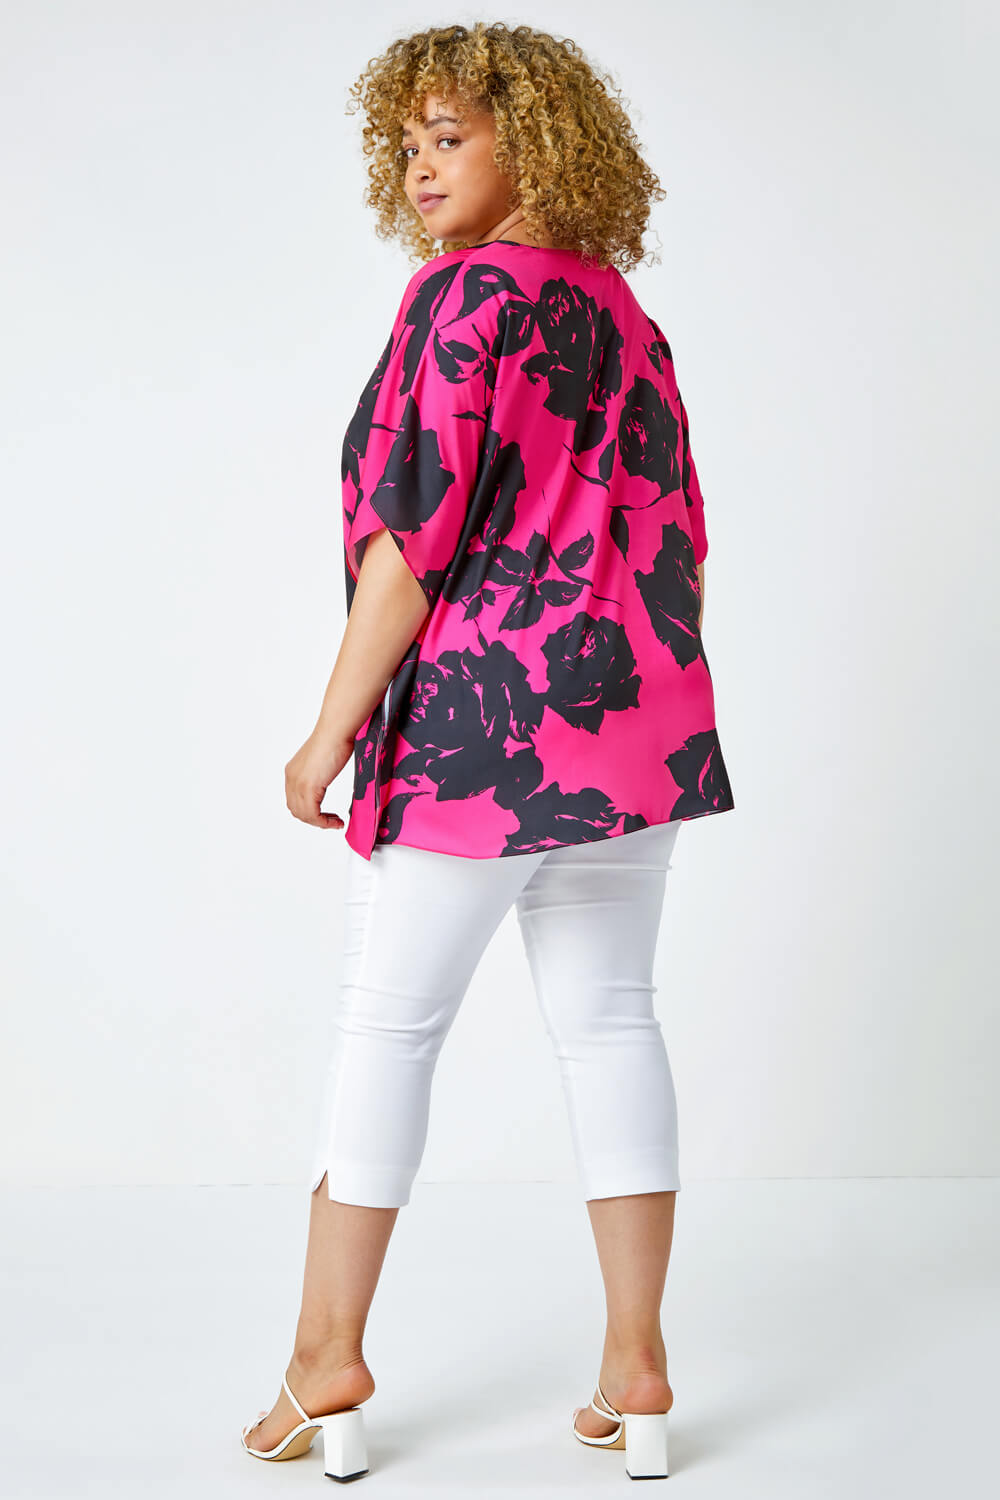 PINK Curve Floral Print Chiffon Top, Image 3 of 5